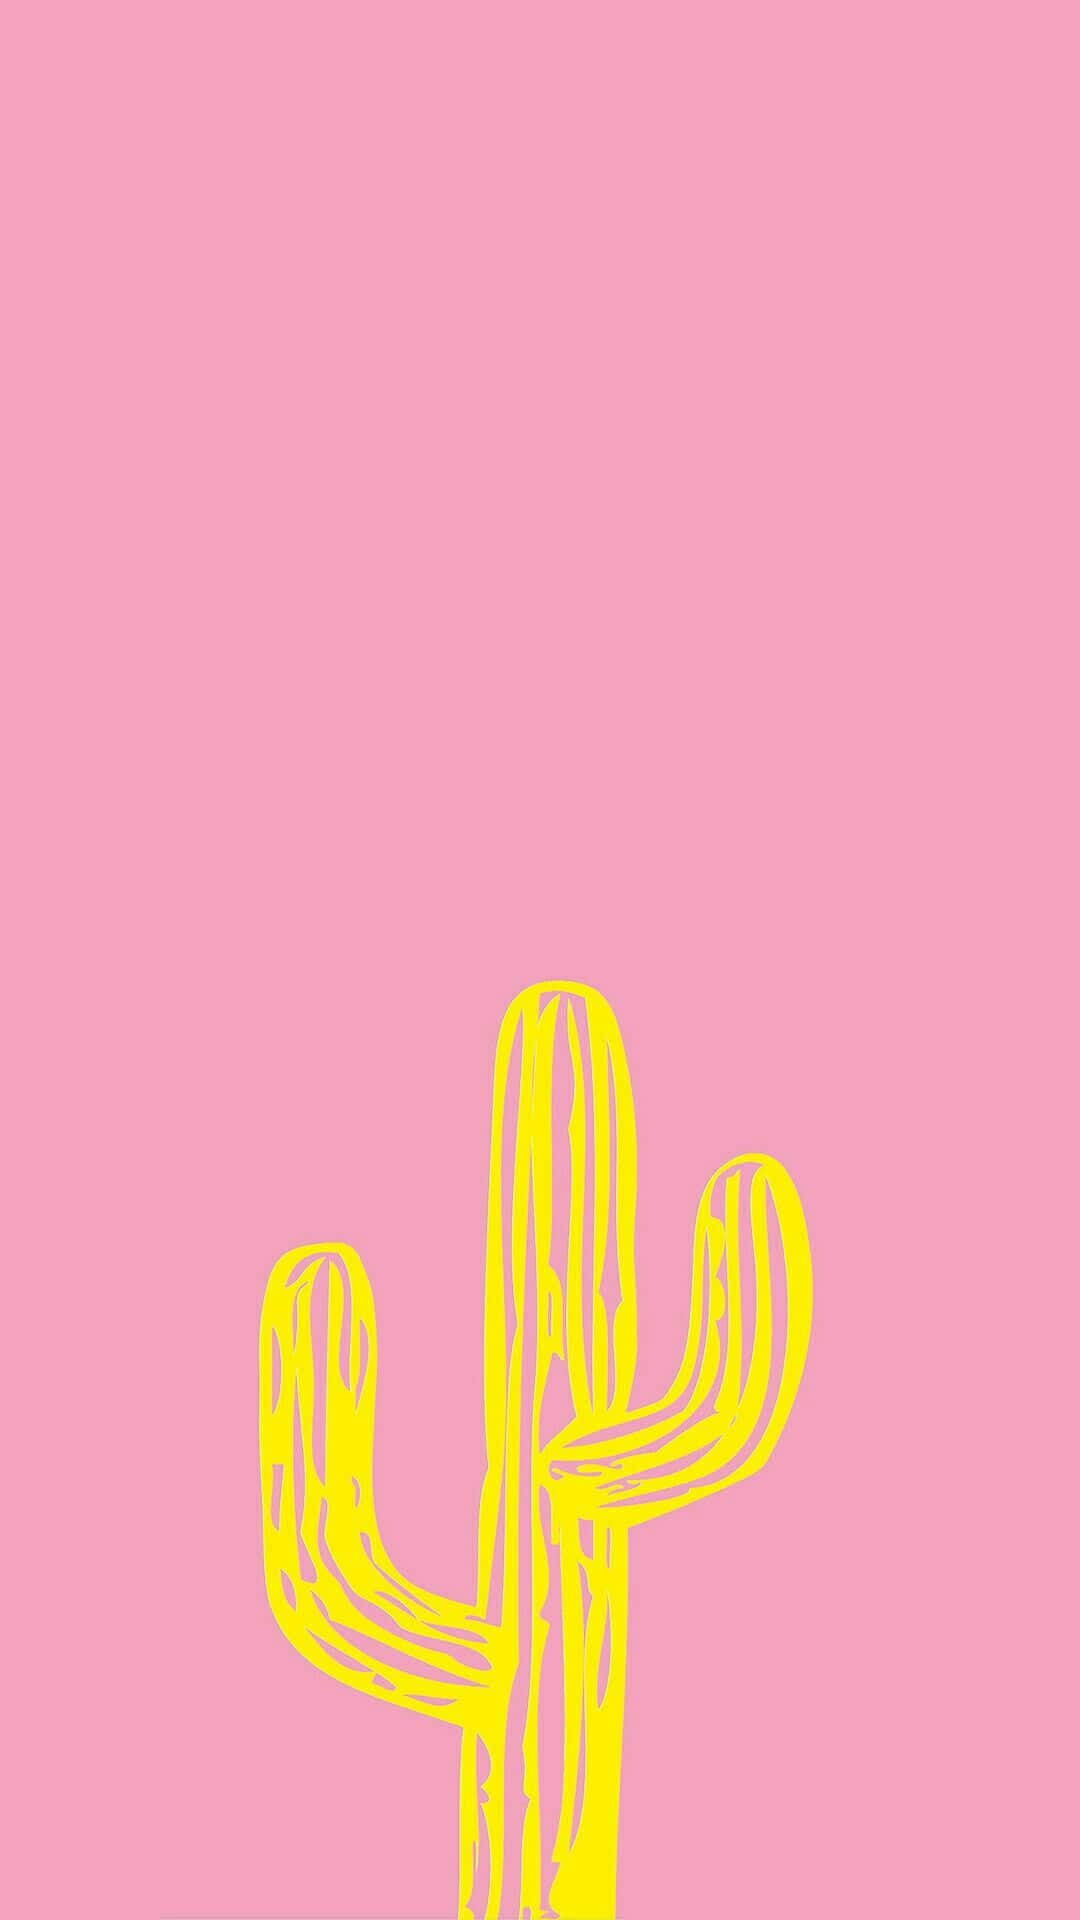 "A cute cactus giving you the warmest of welcomes." Wallpaper